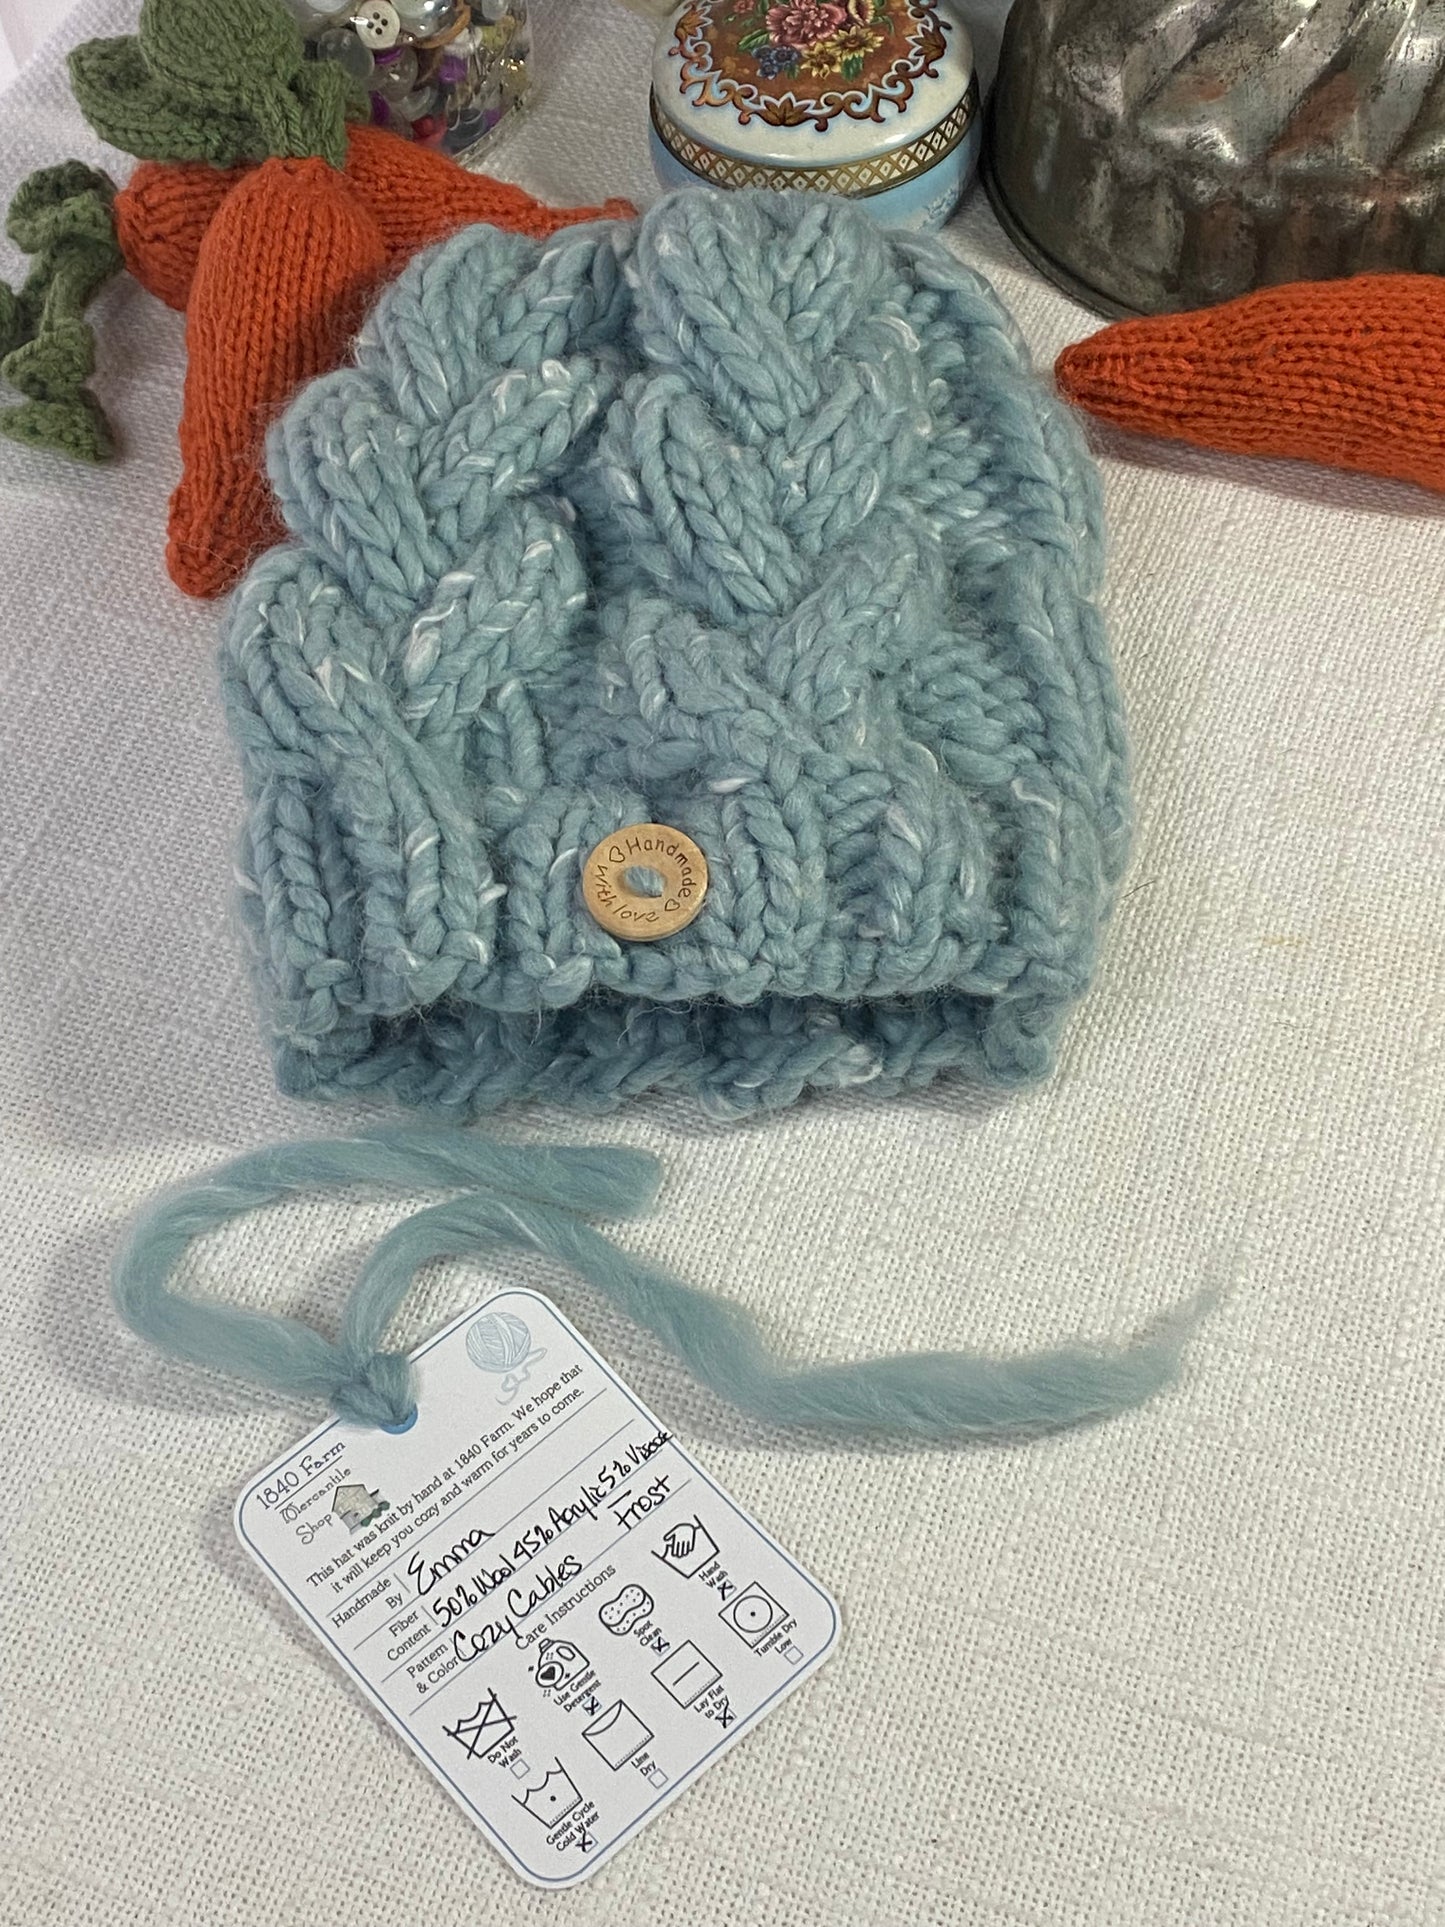 Cozy Cables Hat - Wool Blend Fiber in Frost